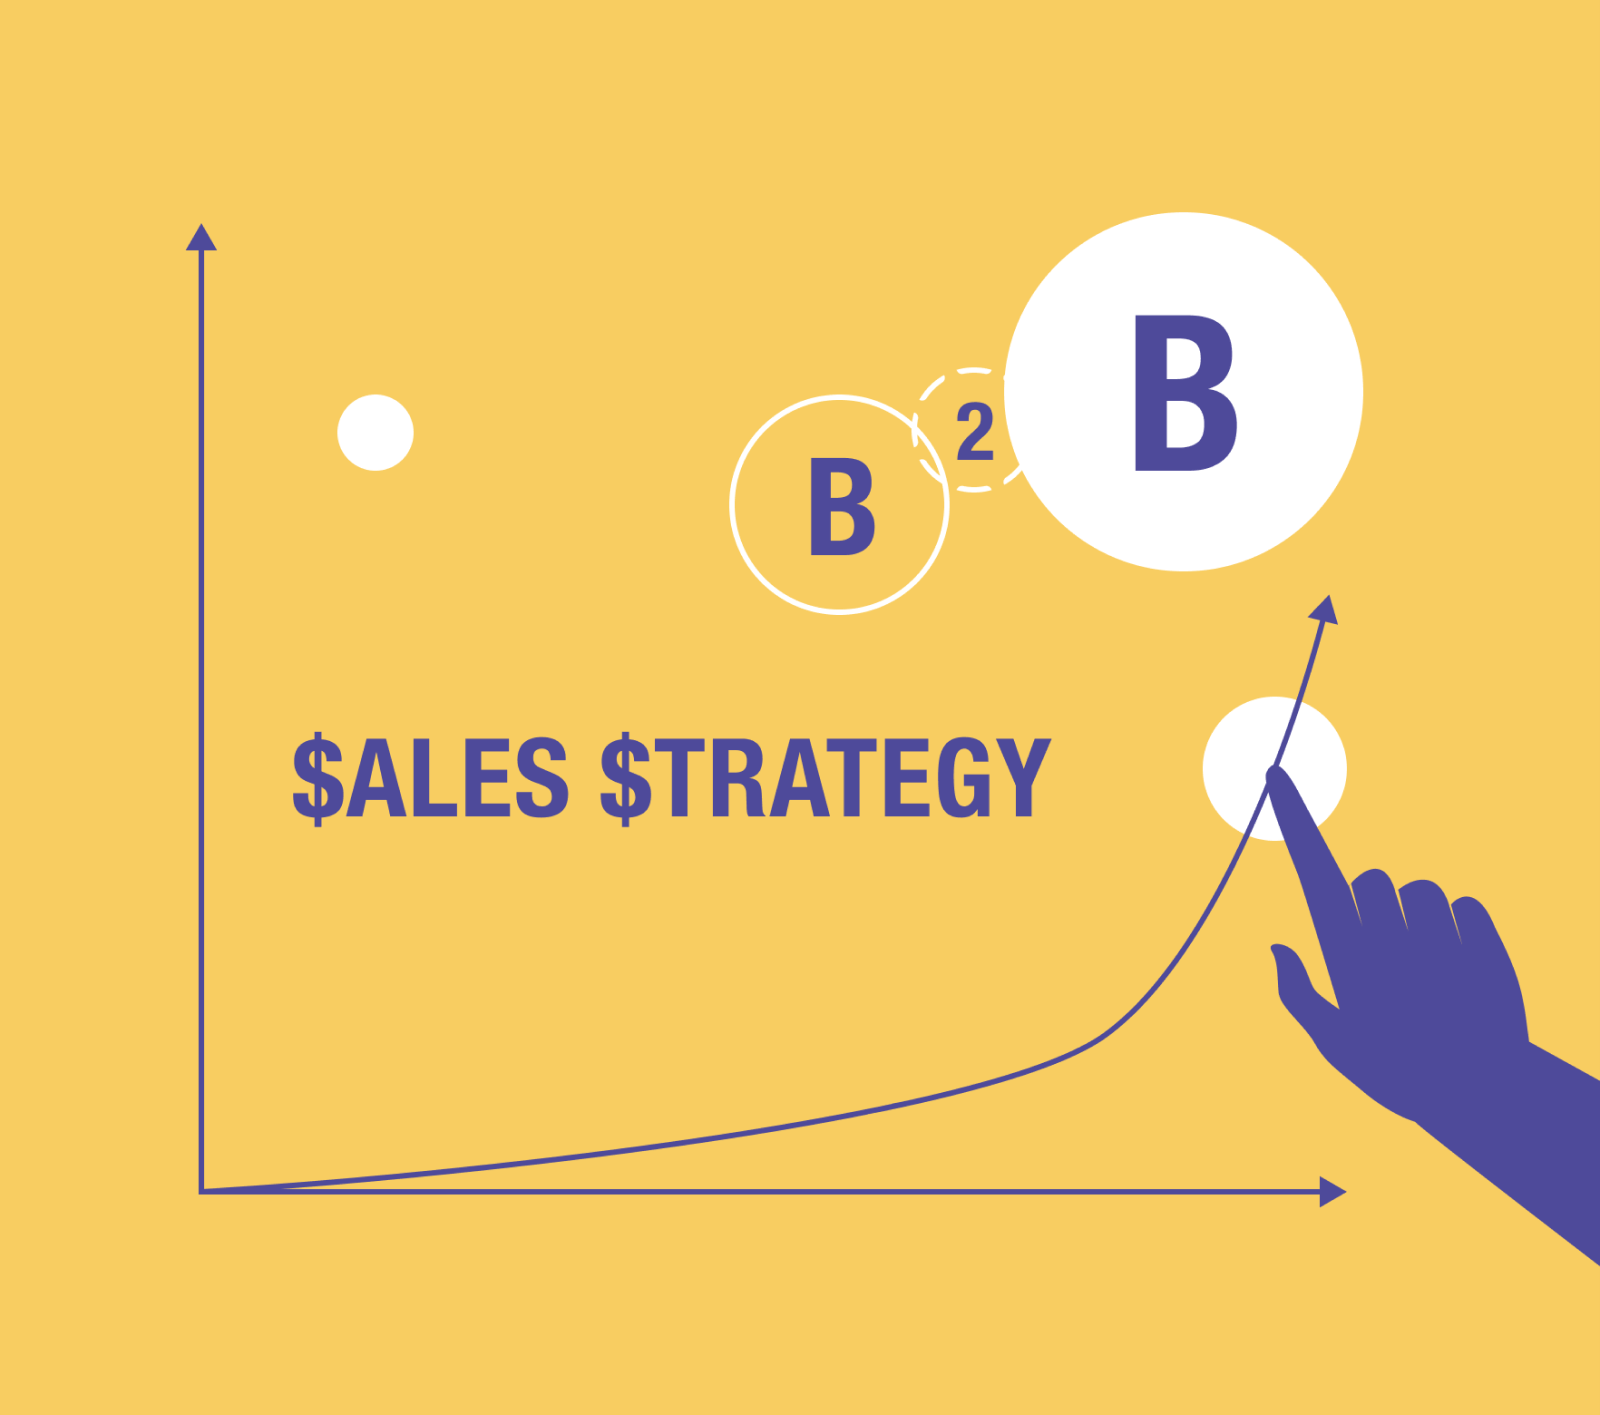 Sales Strategy & Process mapping services